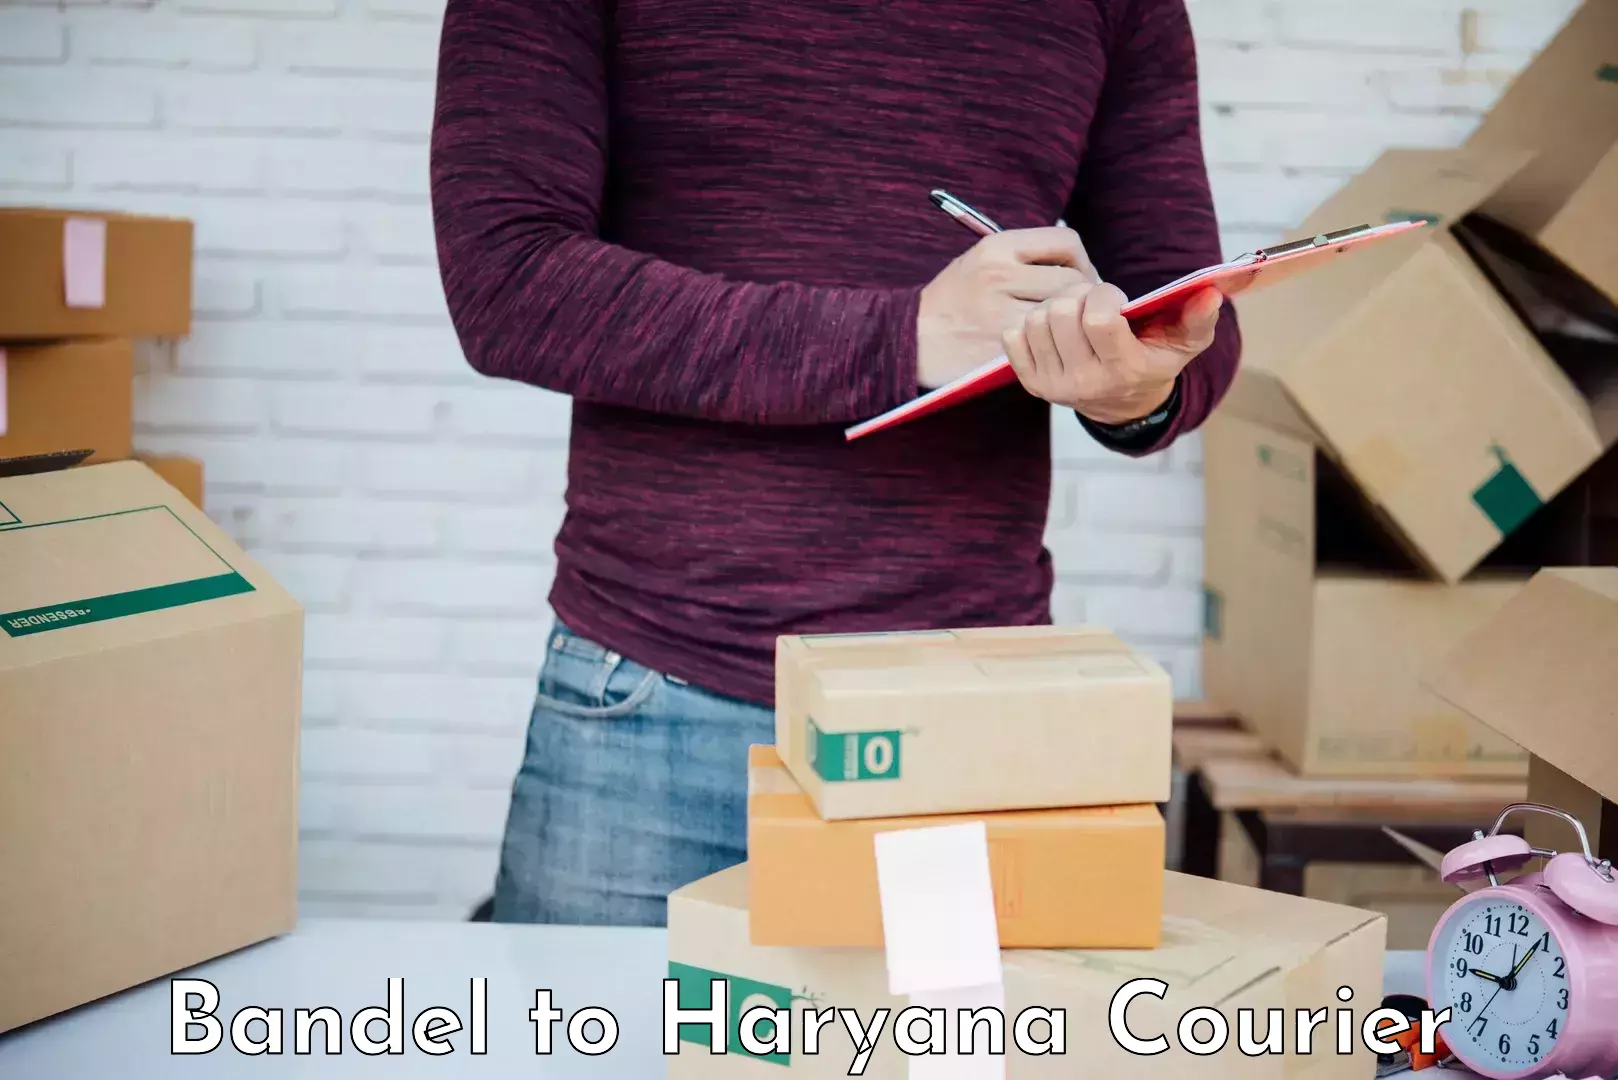 Moving and handling services Bandel to NCR Haryana